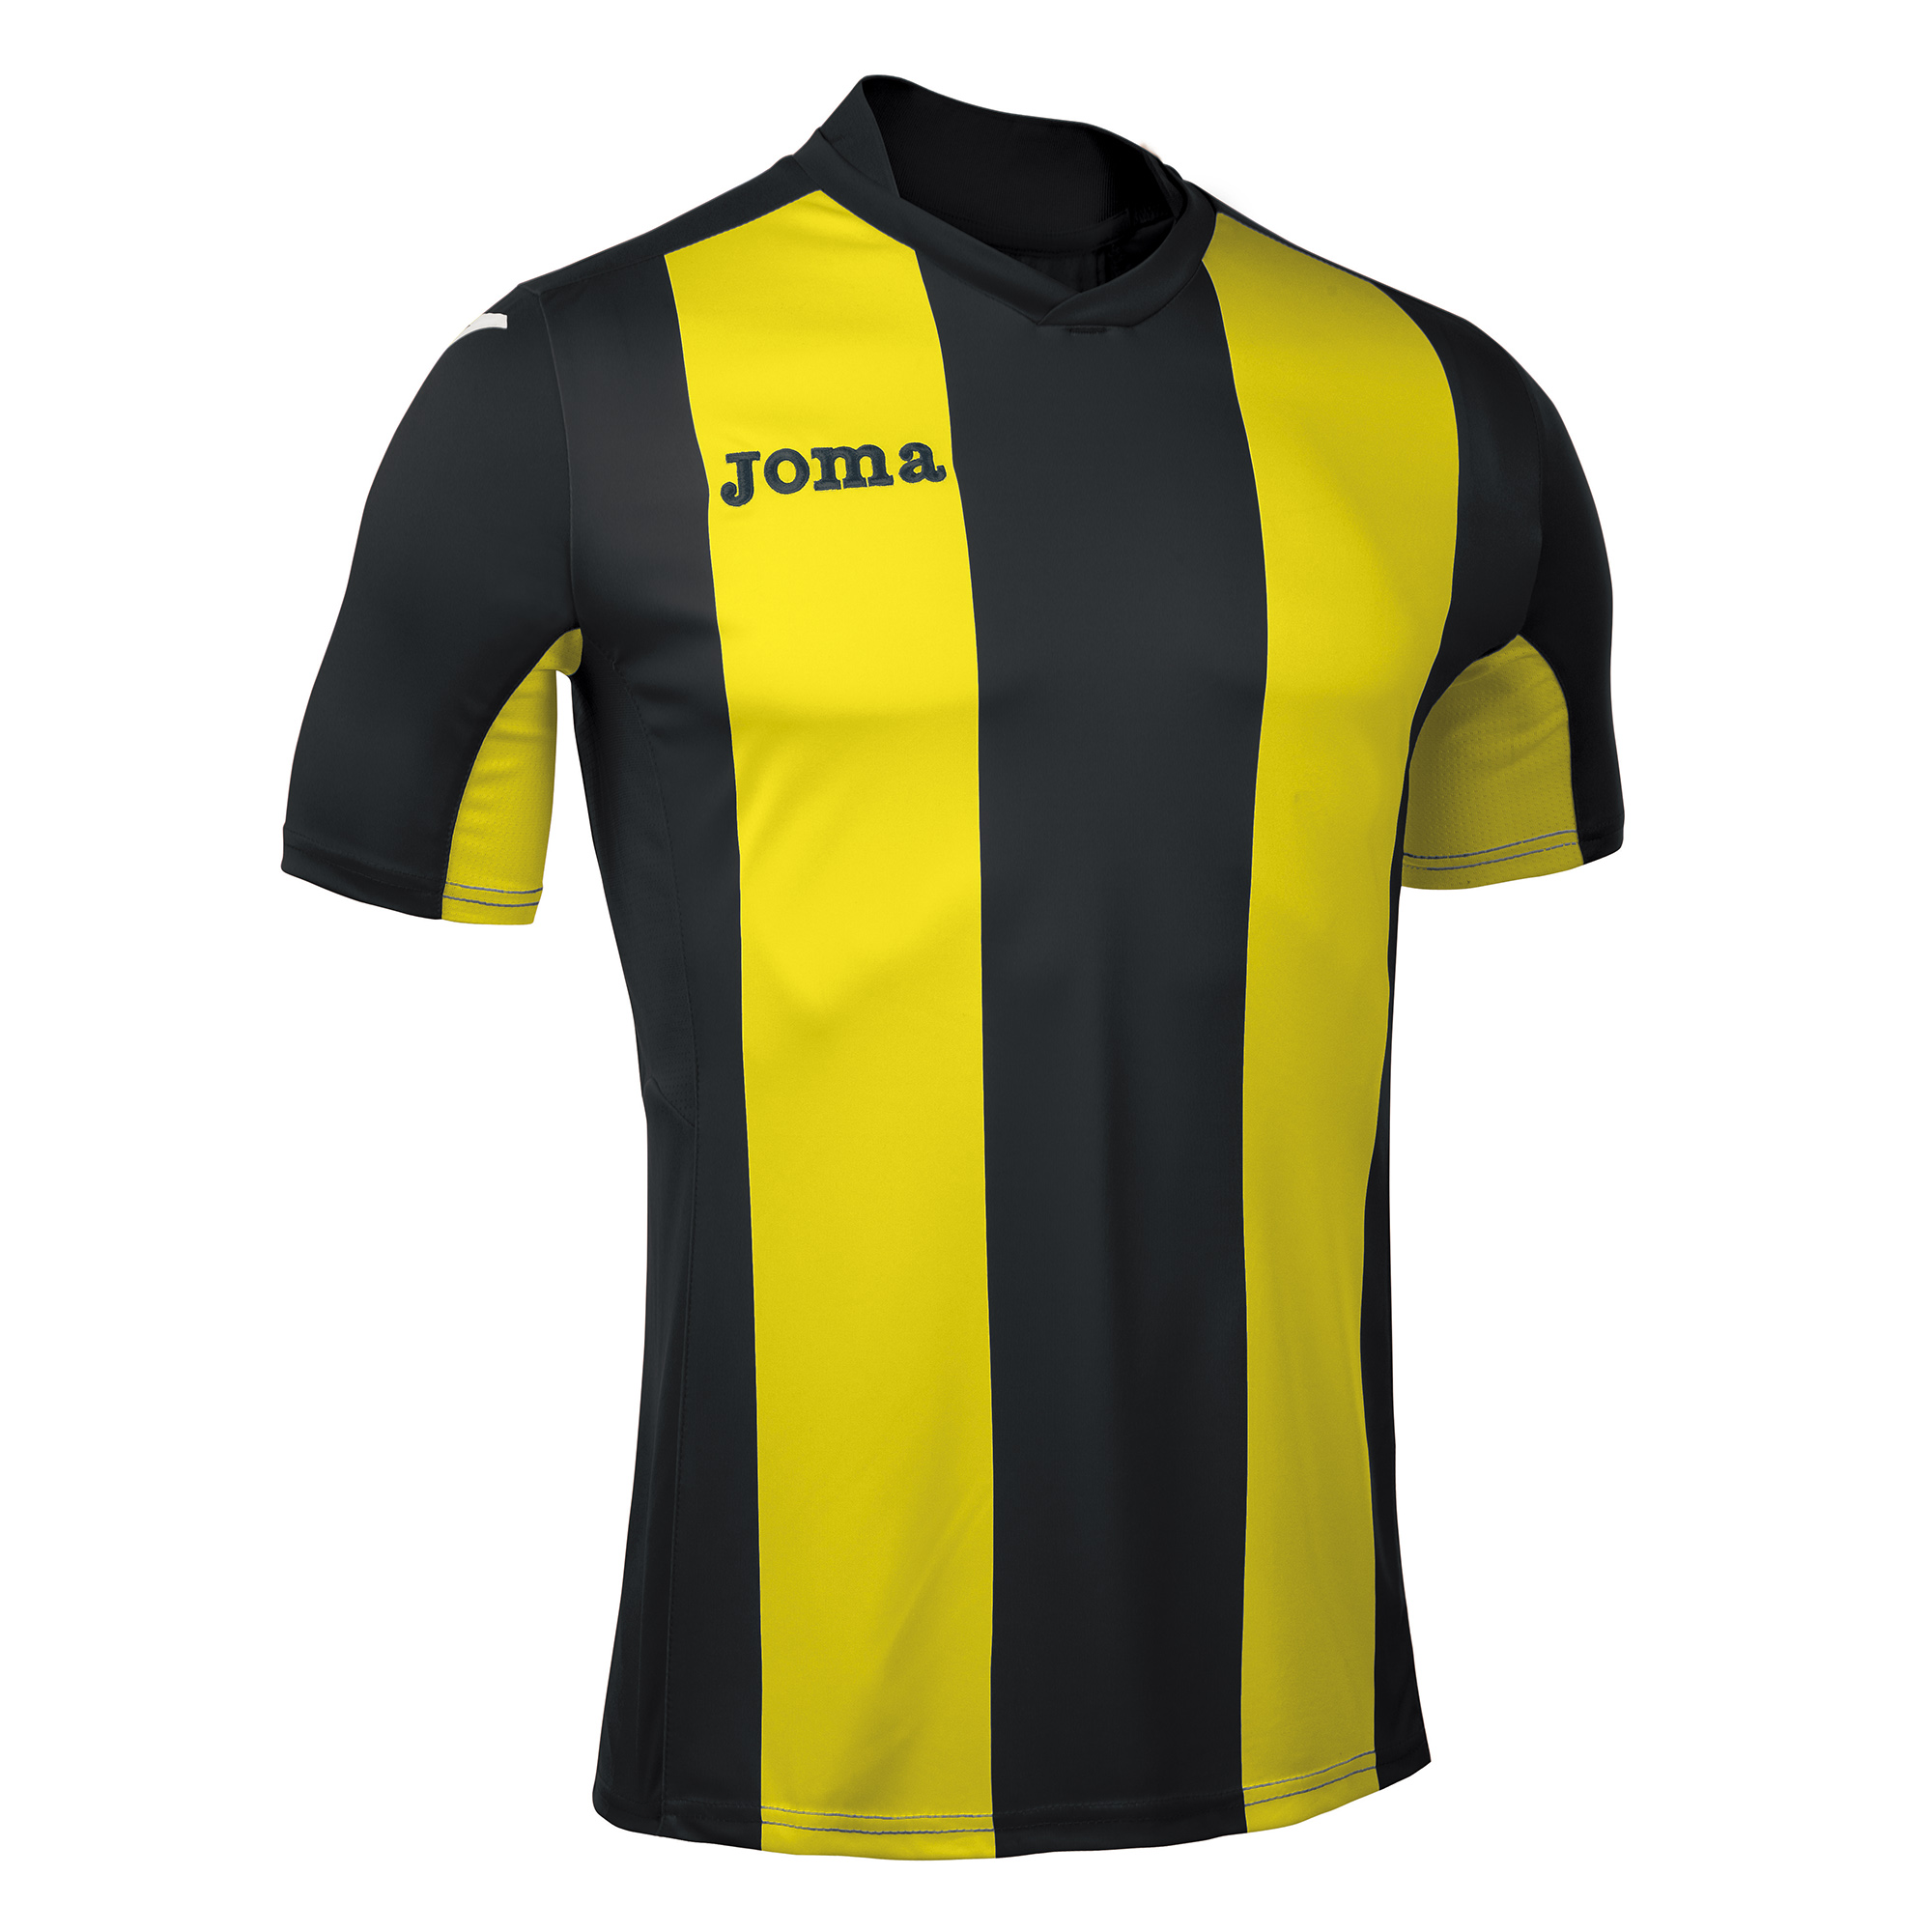 black and yellow jersey,Save up to 18%,www.ilcascinone.com